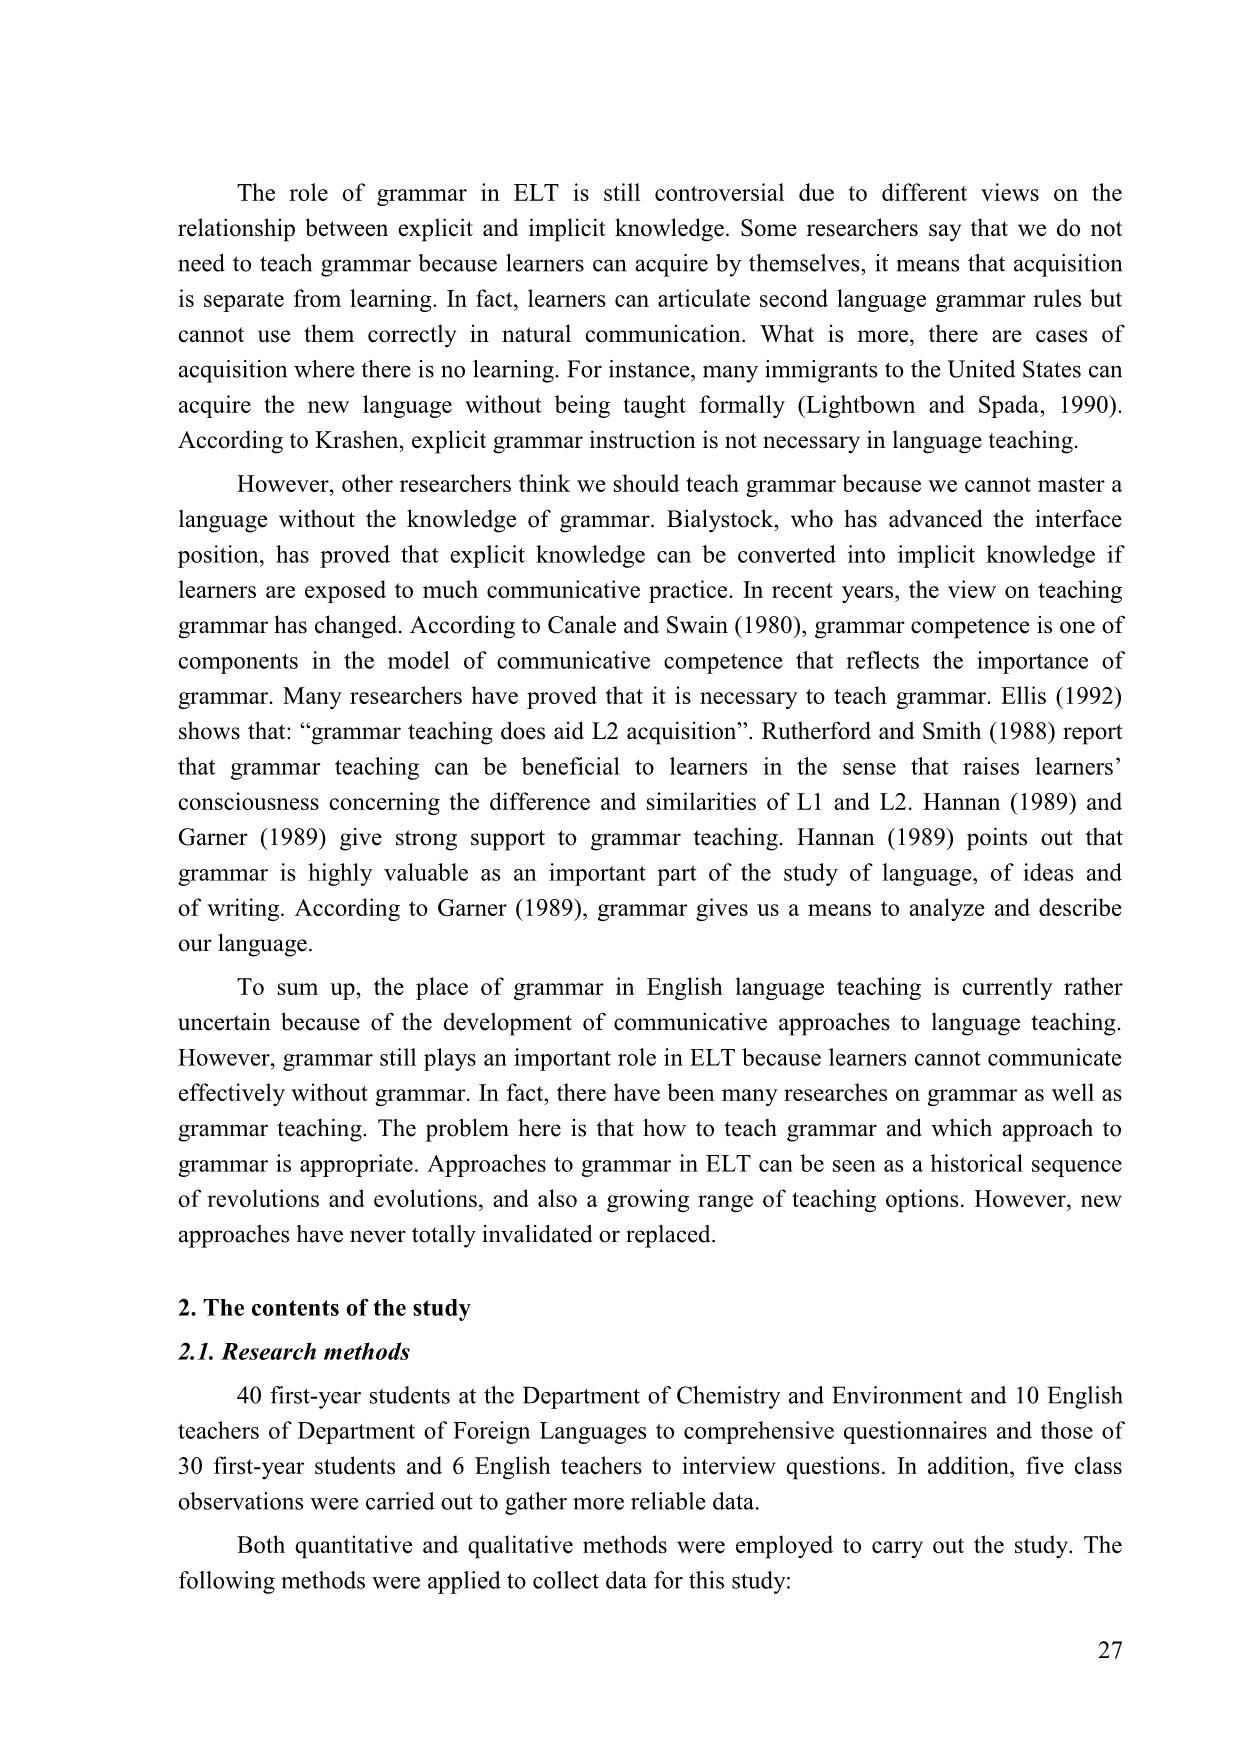 An analysis on grammar approach in the textbook new headway pre-Intermediate and implications for teaching and learning. A cacse study in the department of chemistry and environment of Hung Yen universityof technology and education trang 2